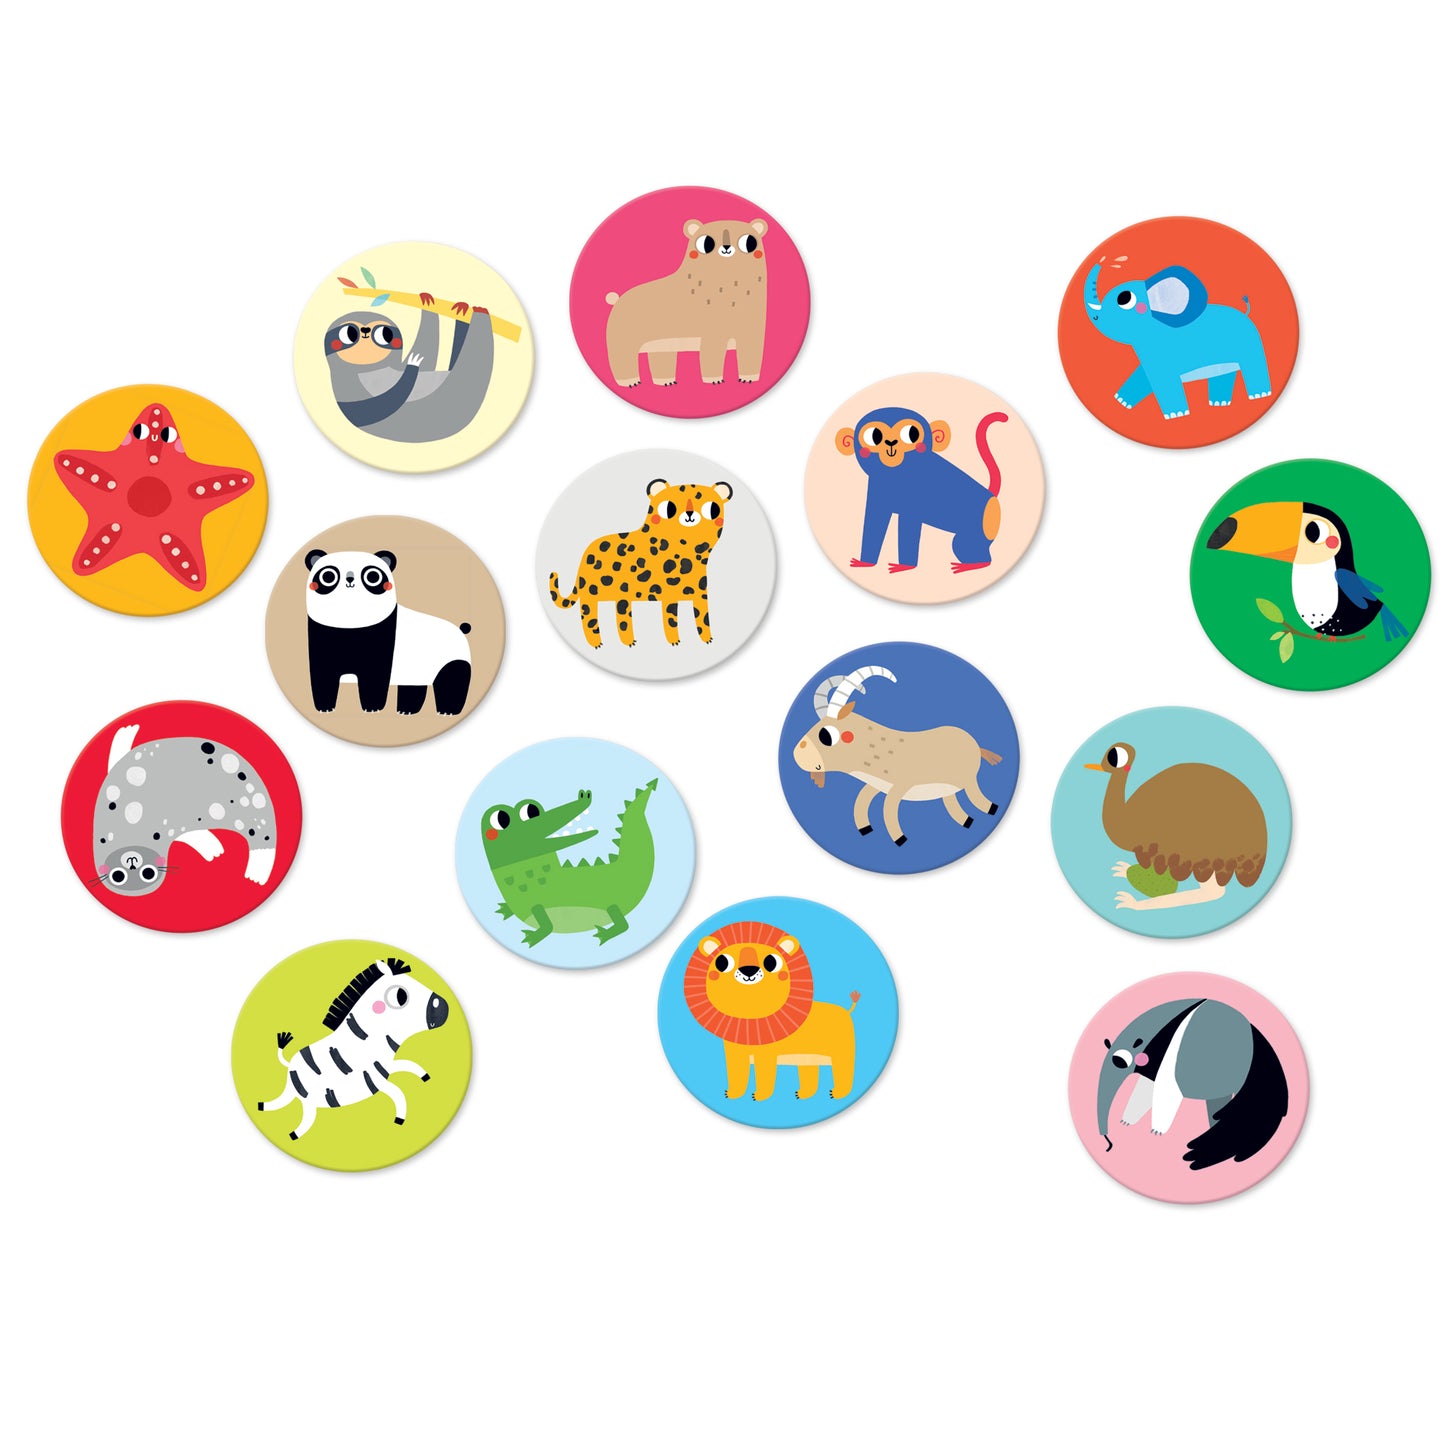 On-the-Go Memory Game Animals